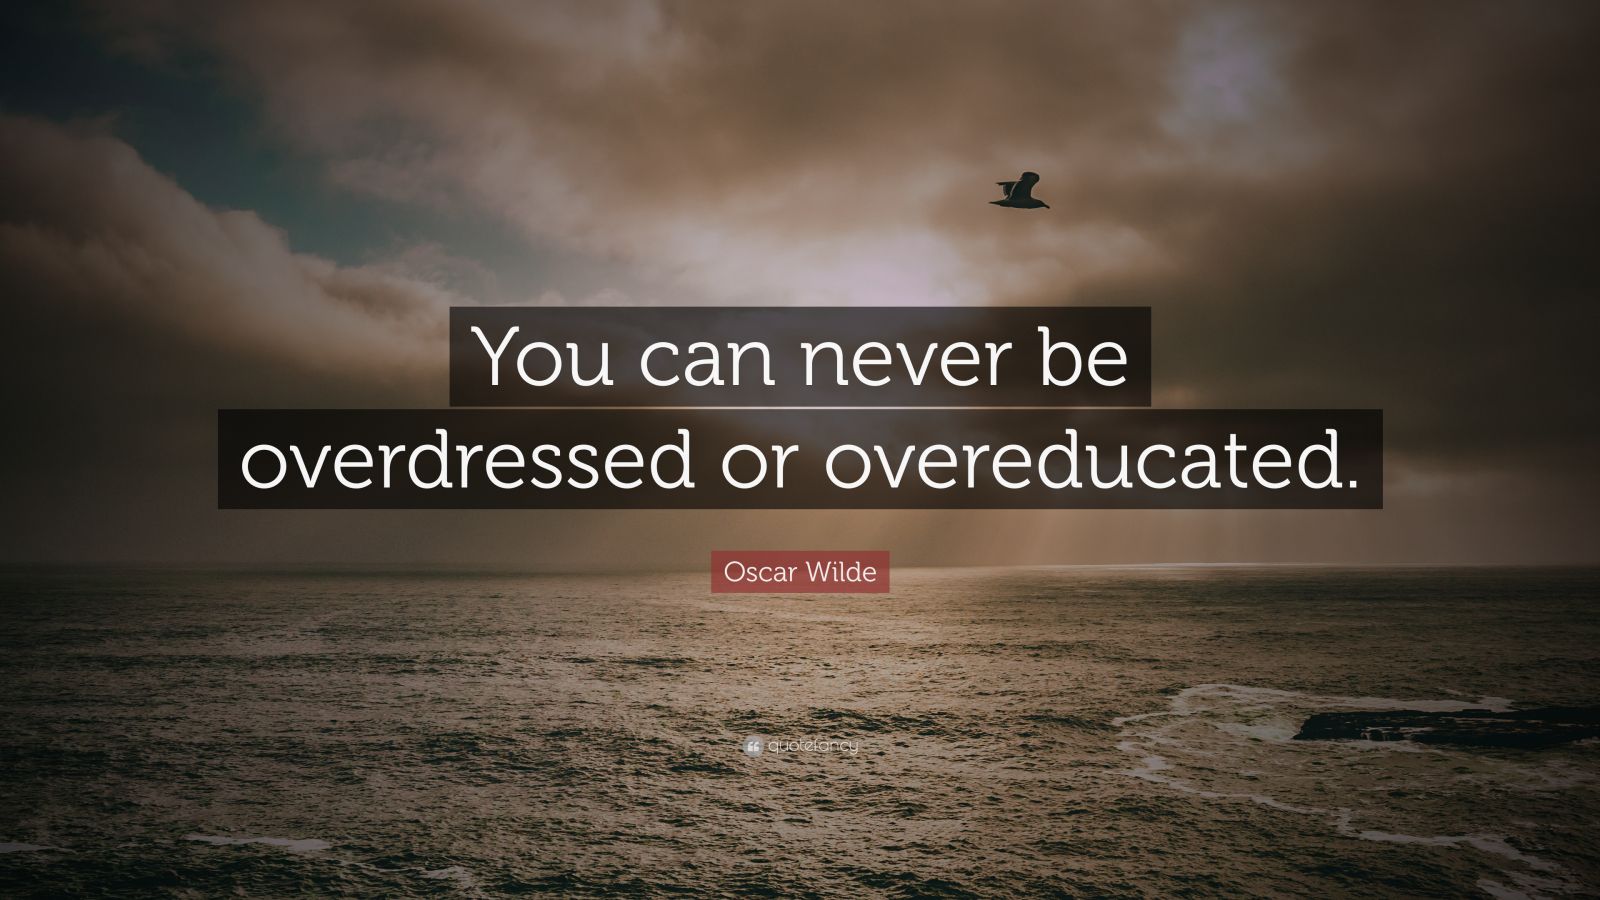 Oscar Wilde Quote: “You can never be overdressed or overeducated.” (16 ...